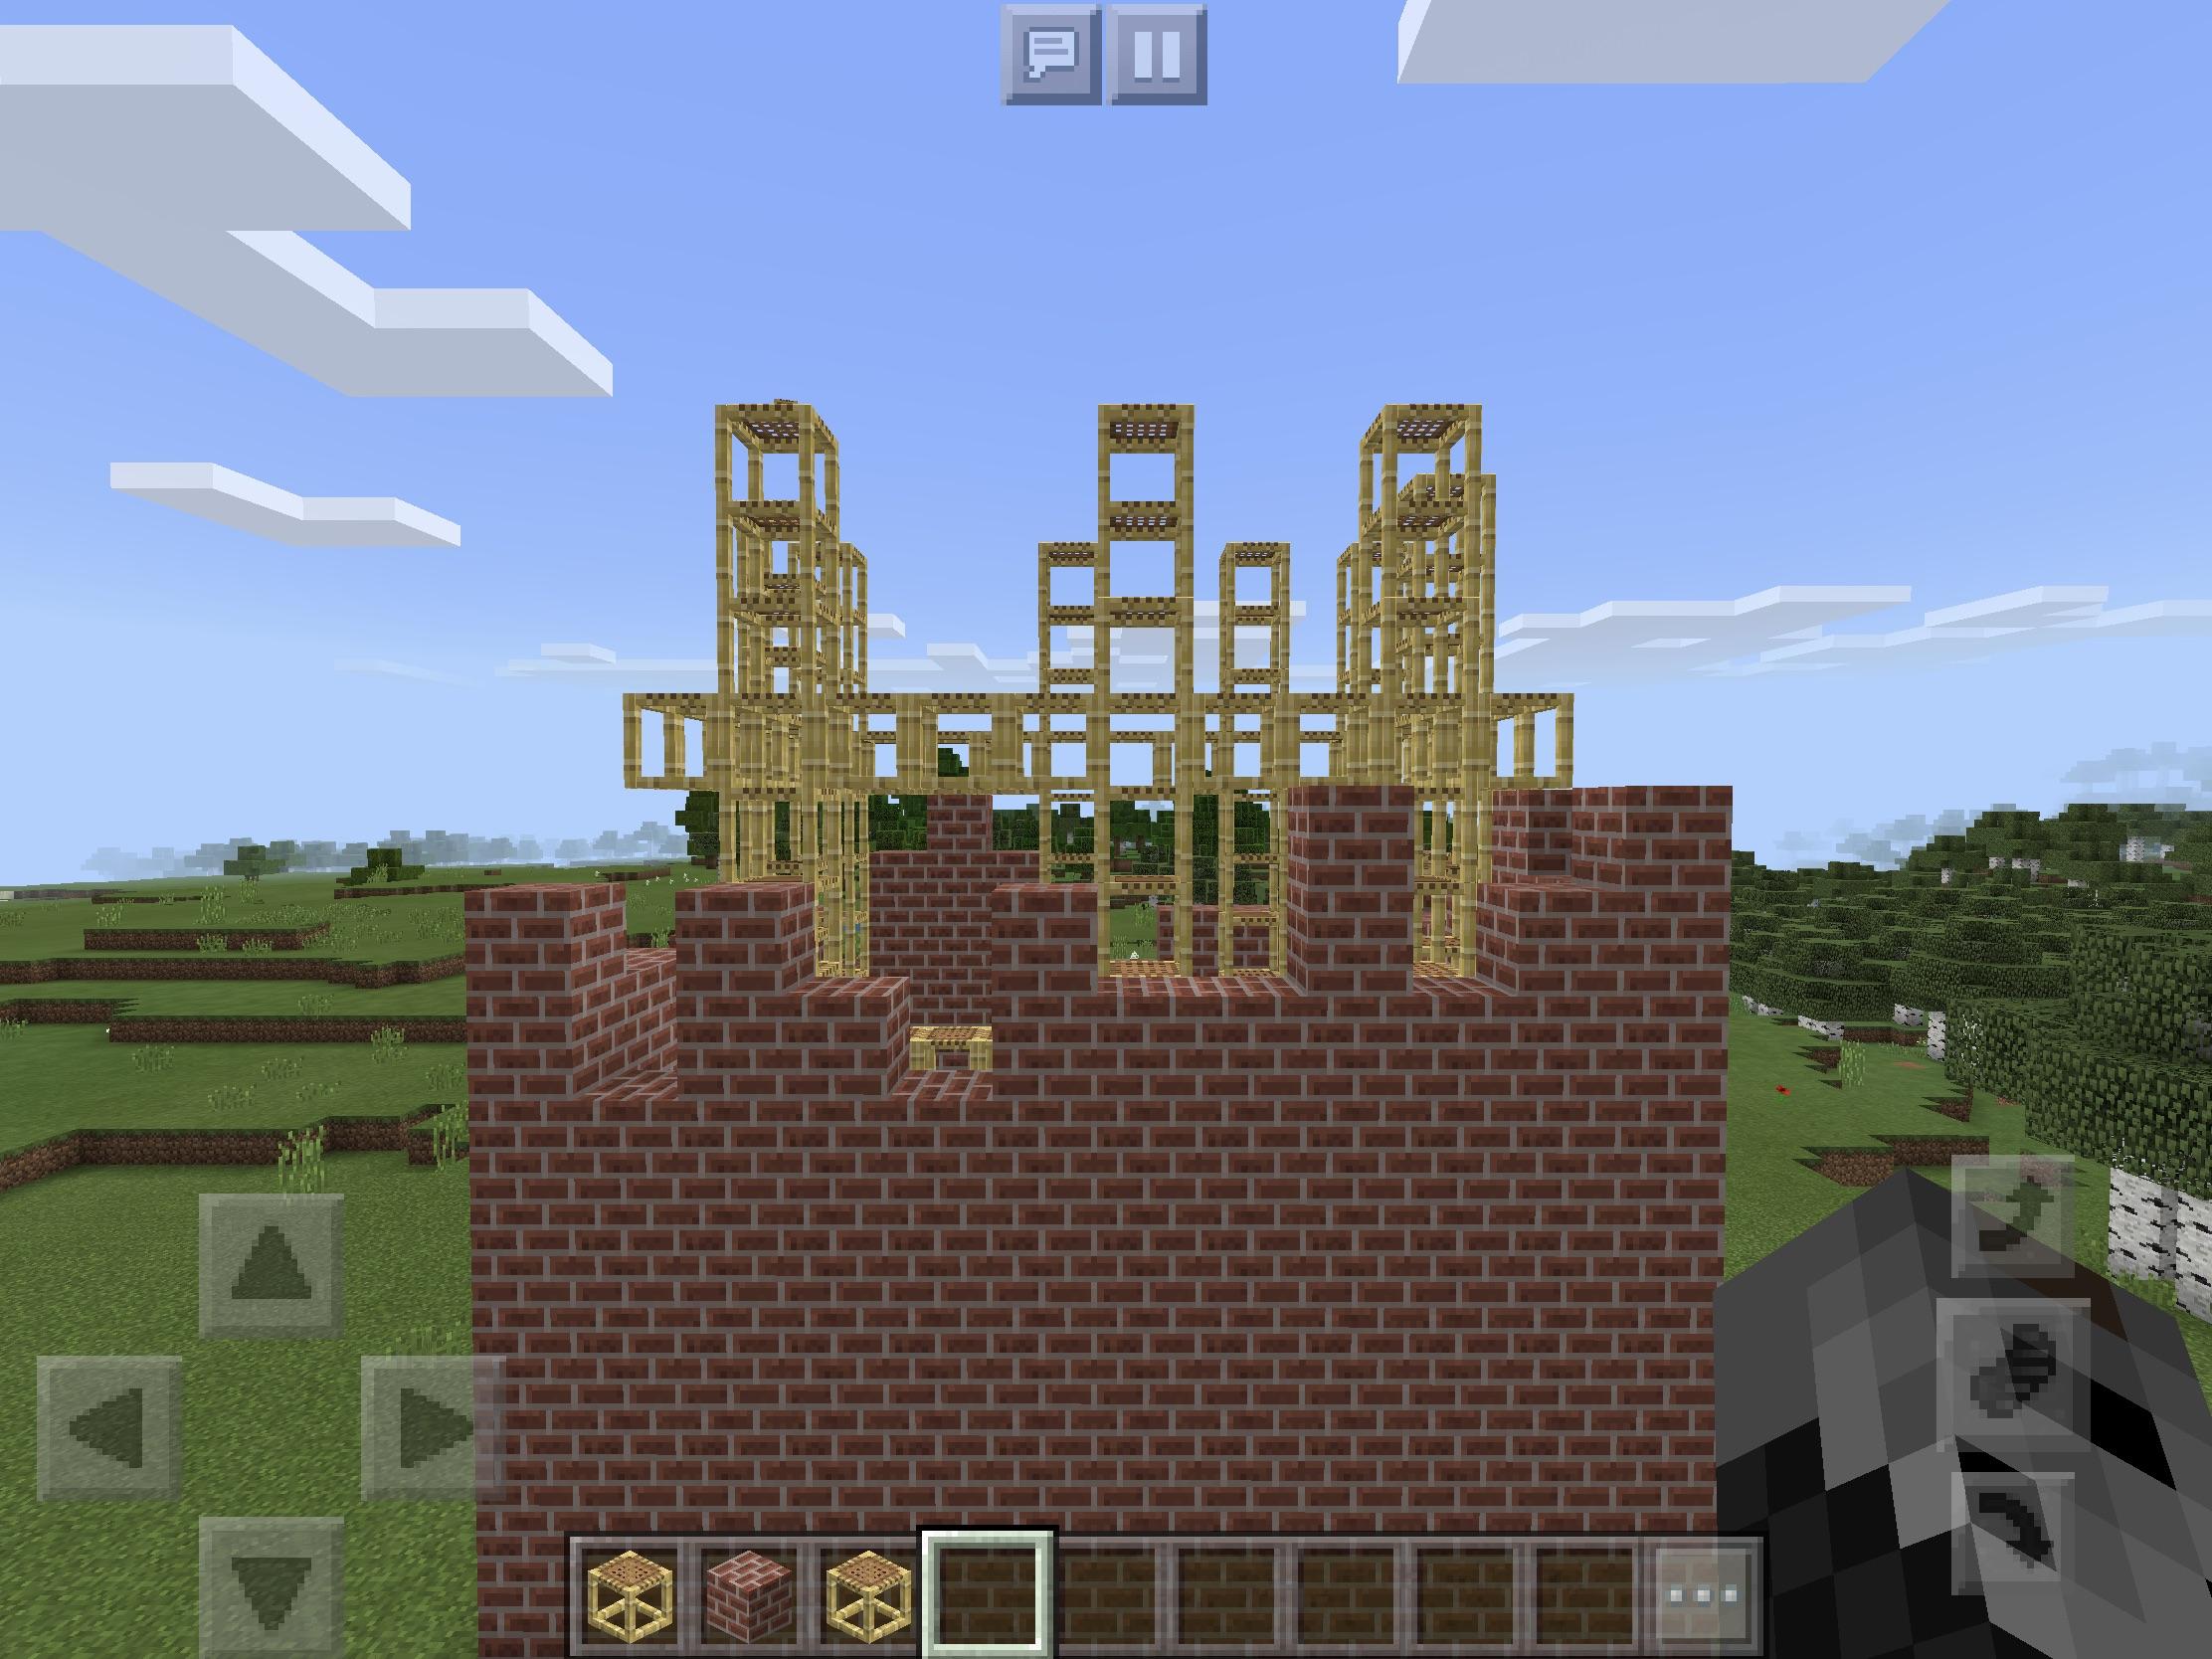 Scaffolding is good to make unfinished buildings : Minecraft